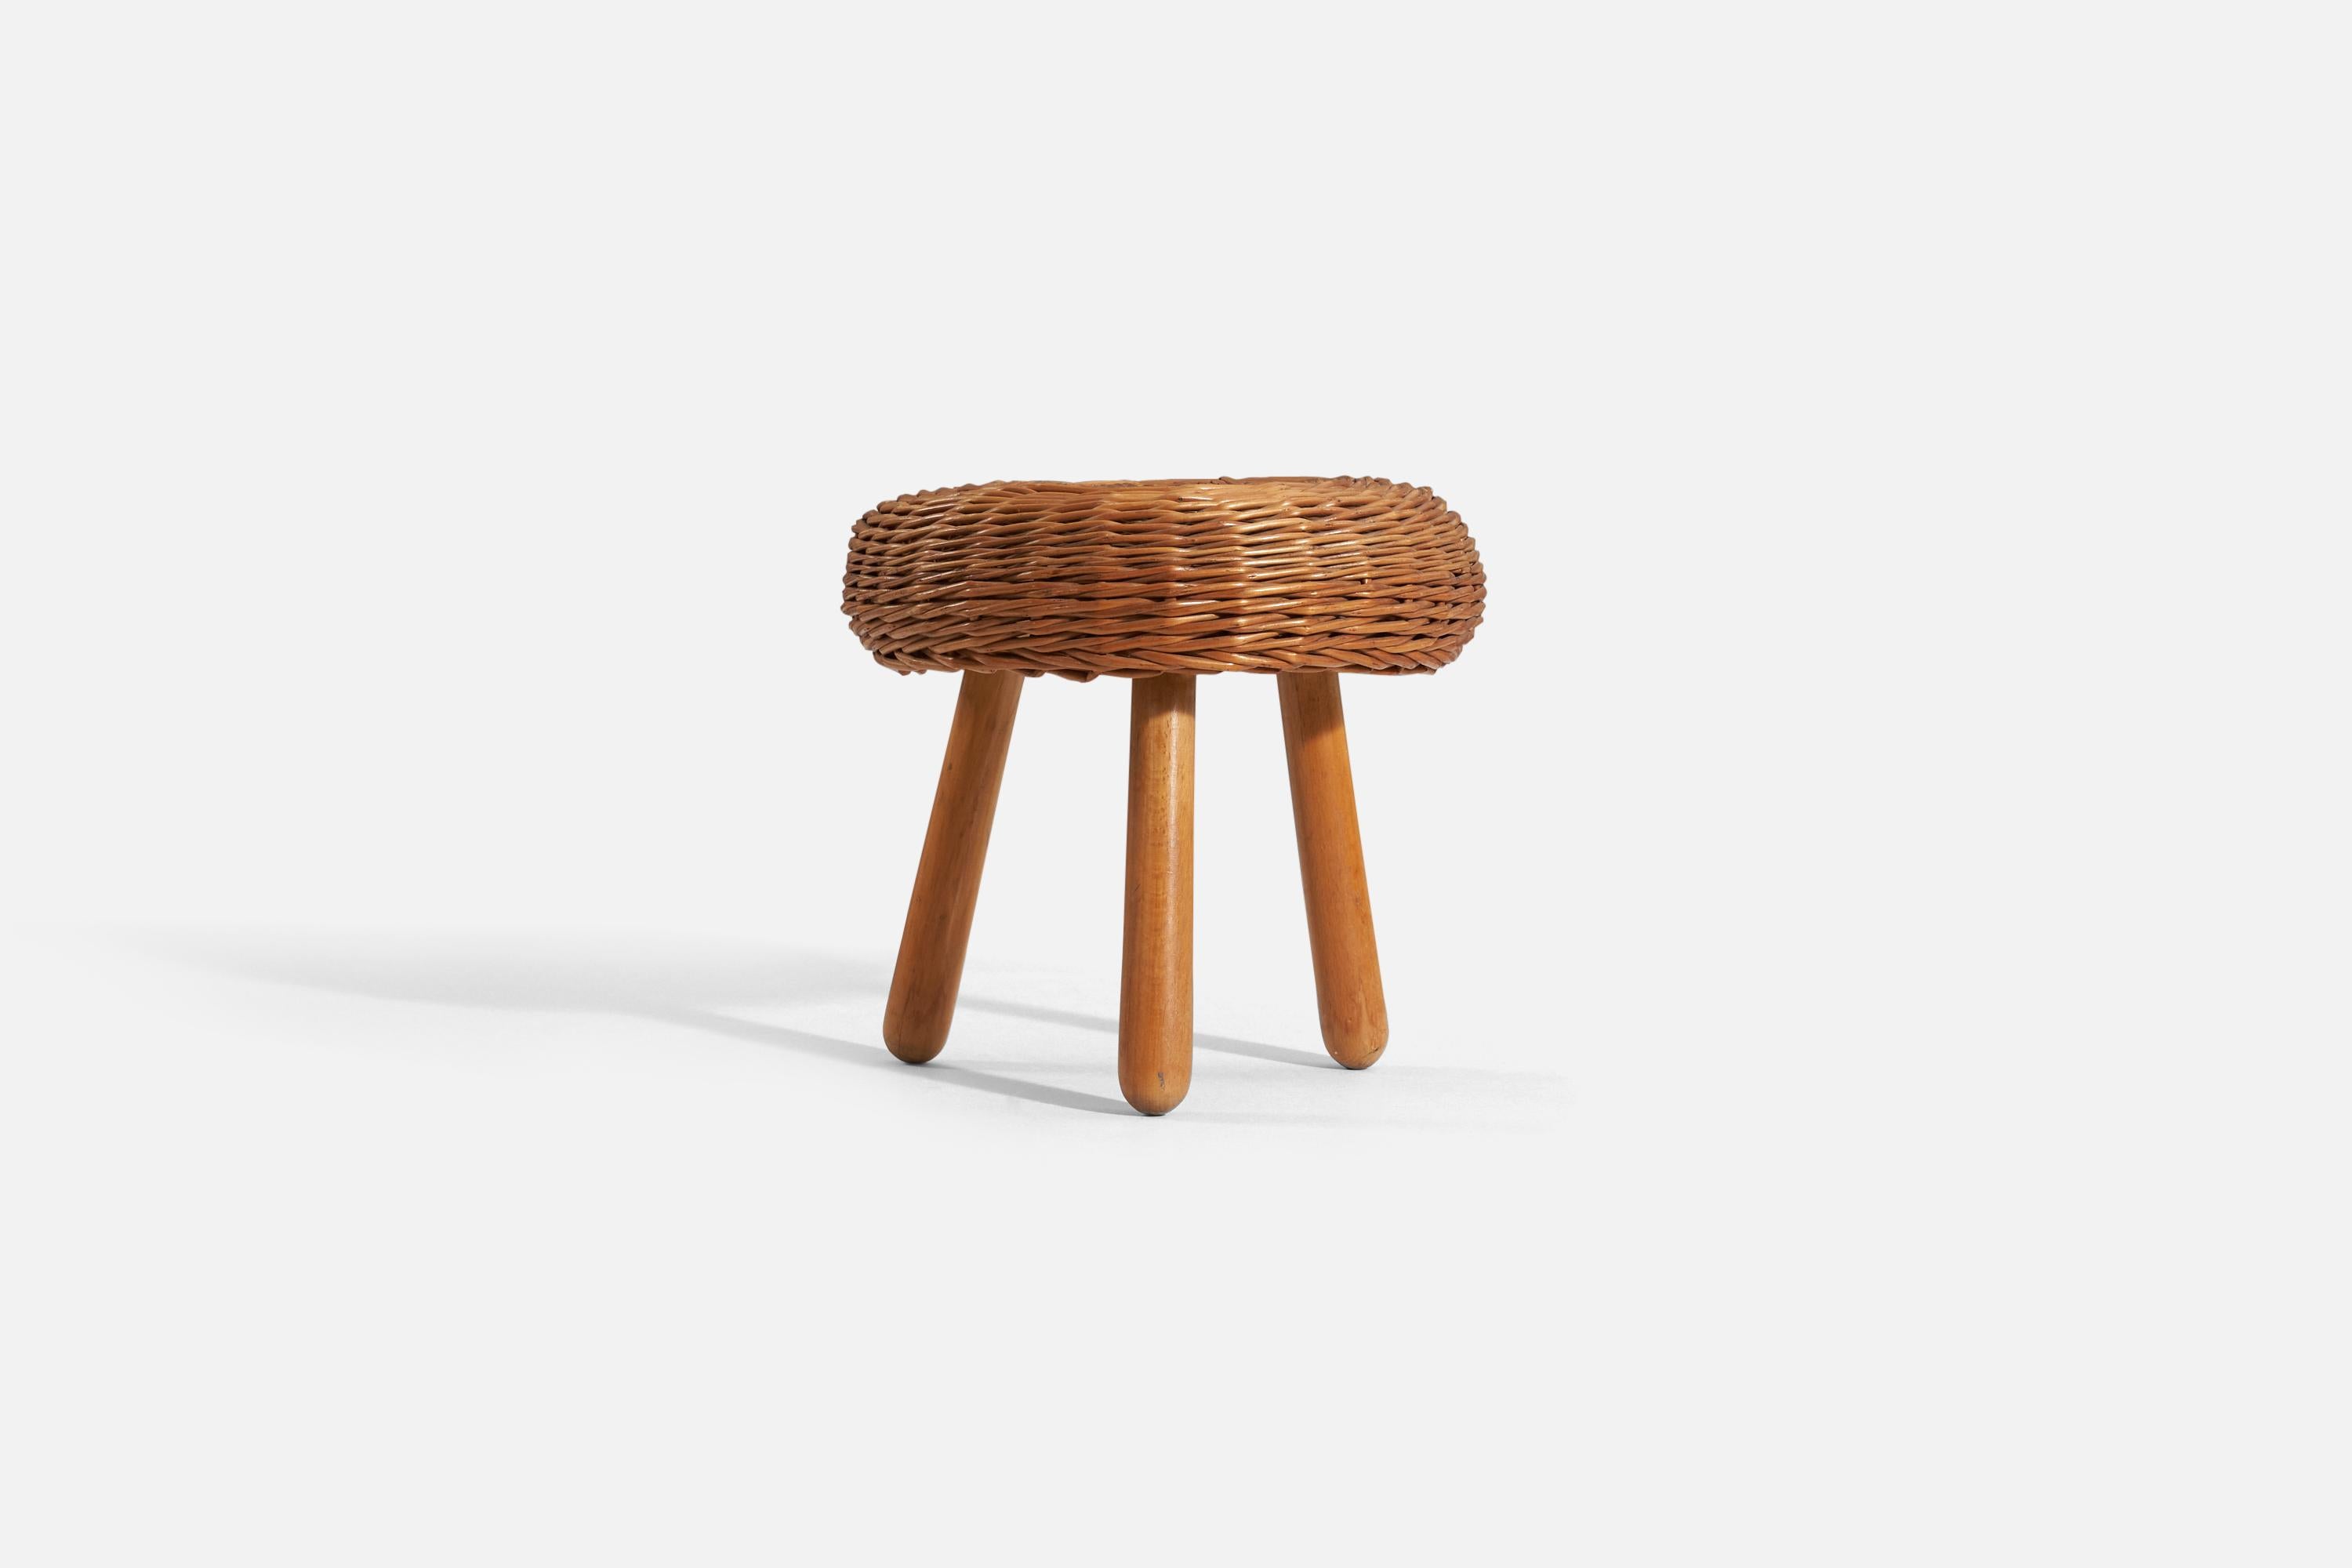 Tony Paul 'Attributed' Stool, Wicker, Wood, United States, 1950s In Good Condition For Sale In High Point, NC